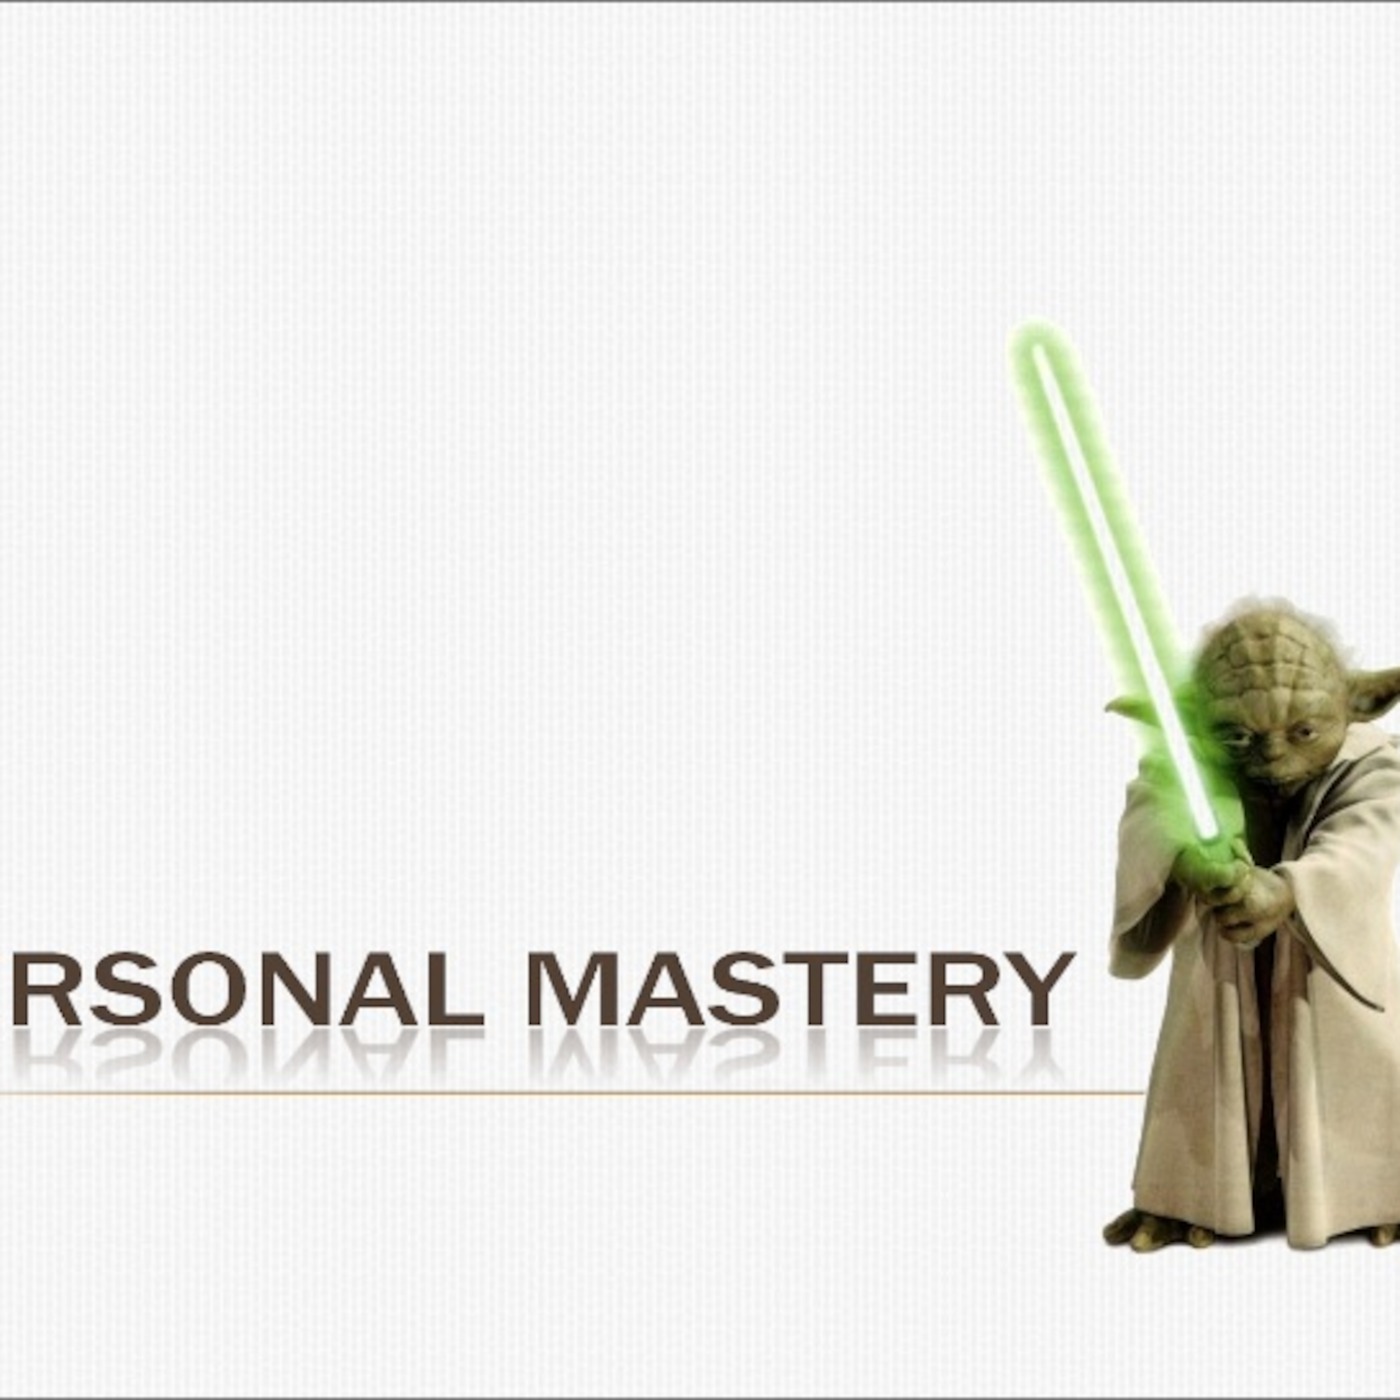 Achieving Mastery - The 3 things concepts that separates the Good from the Great